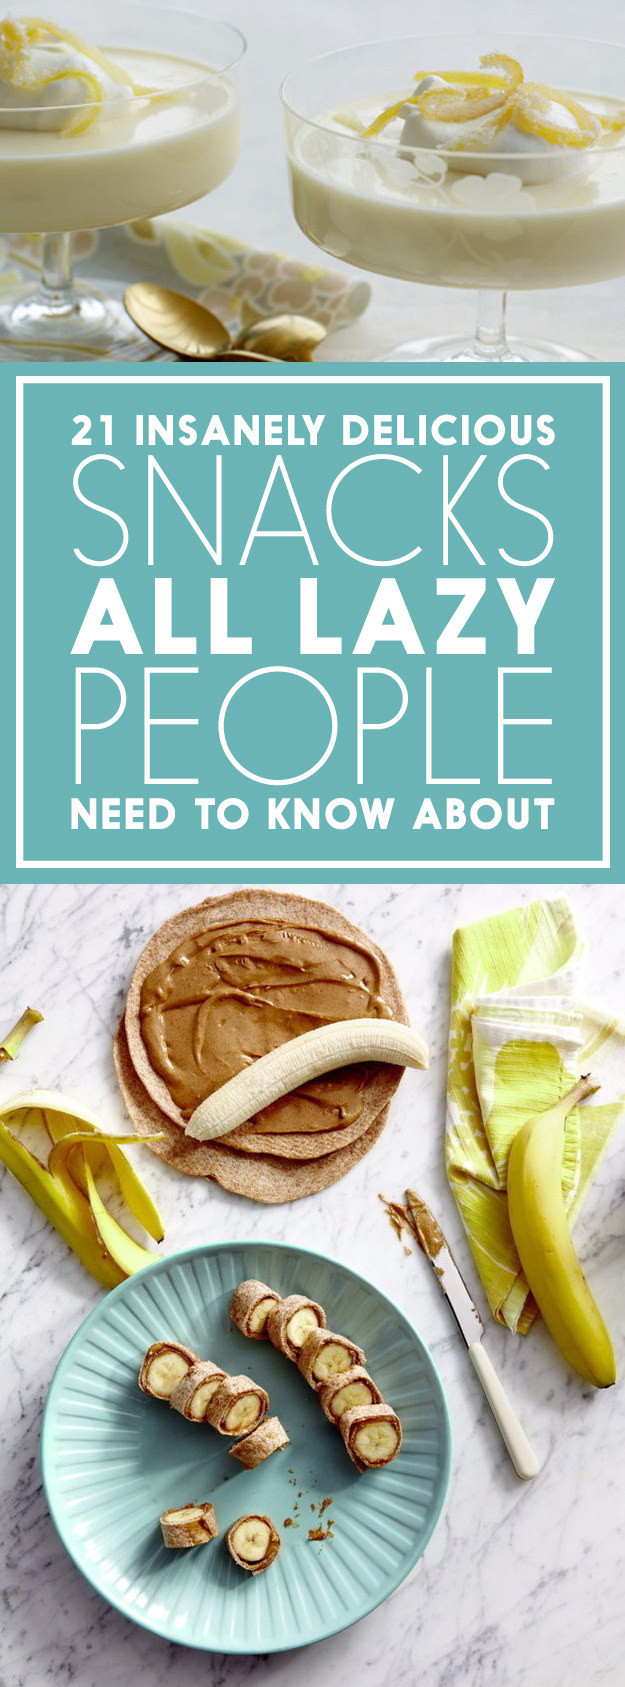 Delicious Healthy Snacks
 21 Insanely Simple And Delicious Snacks Even Lazy People